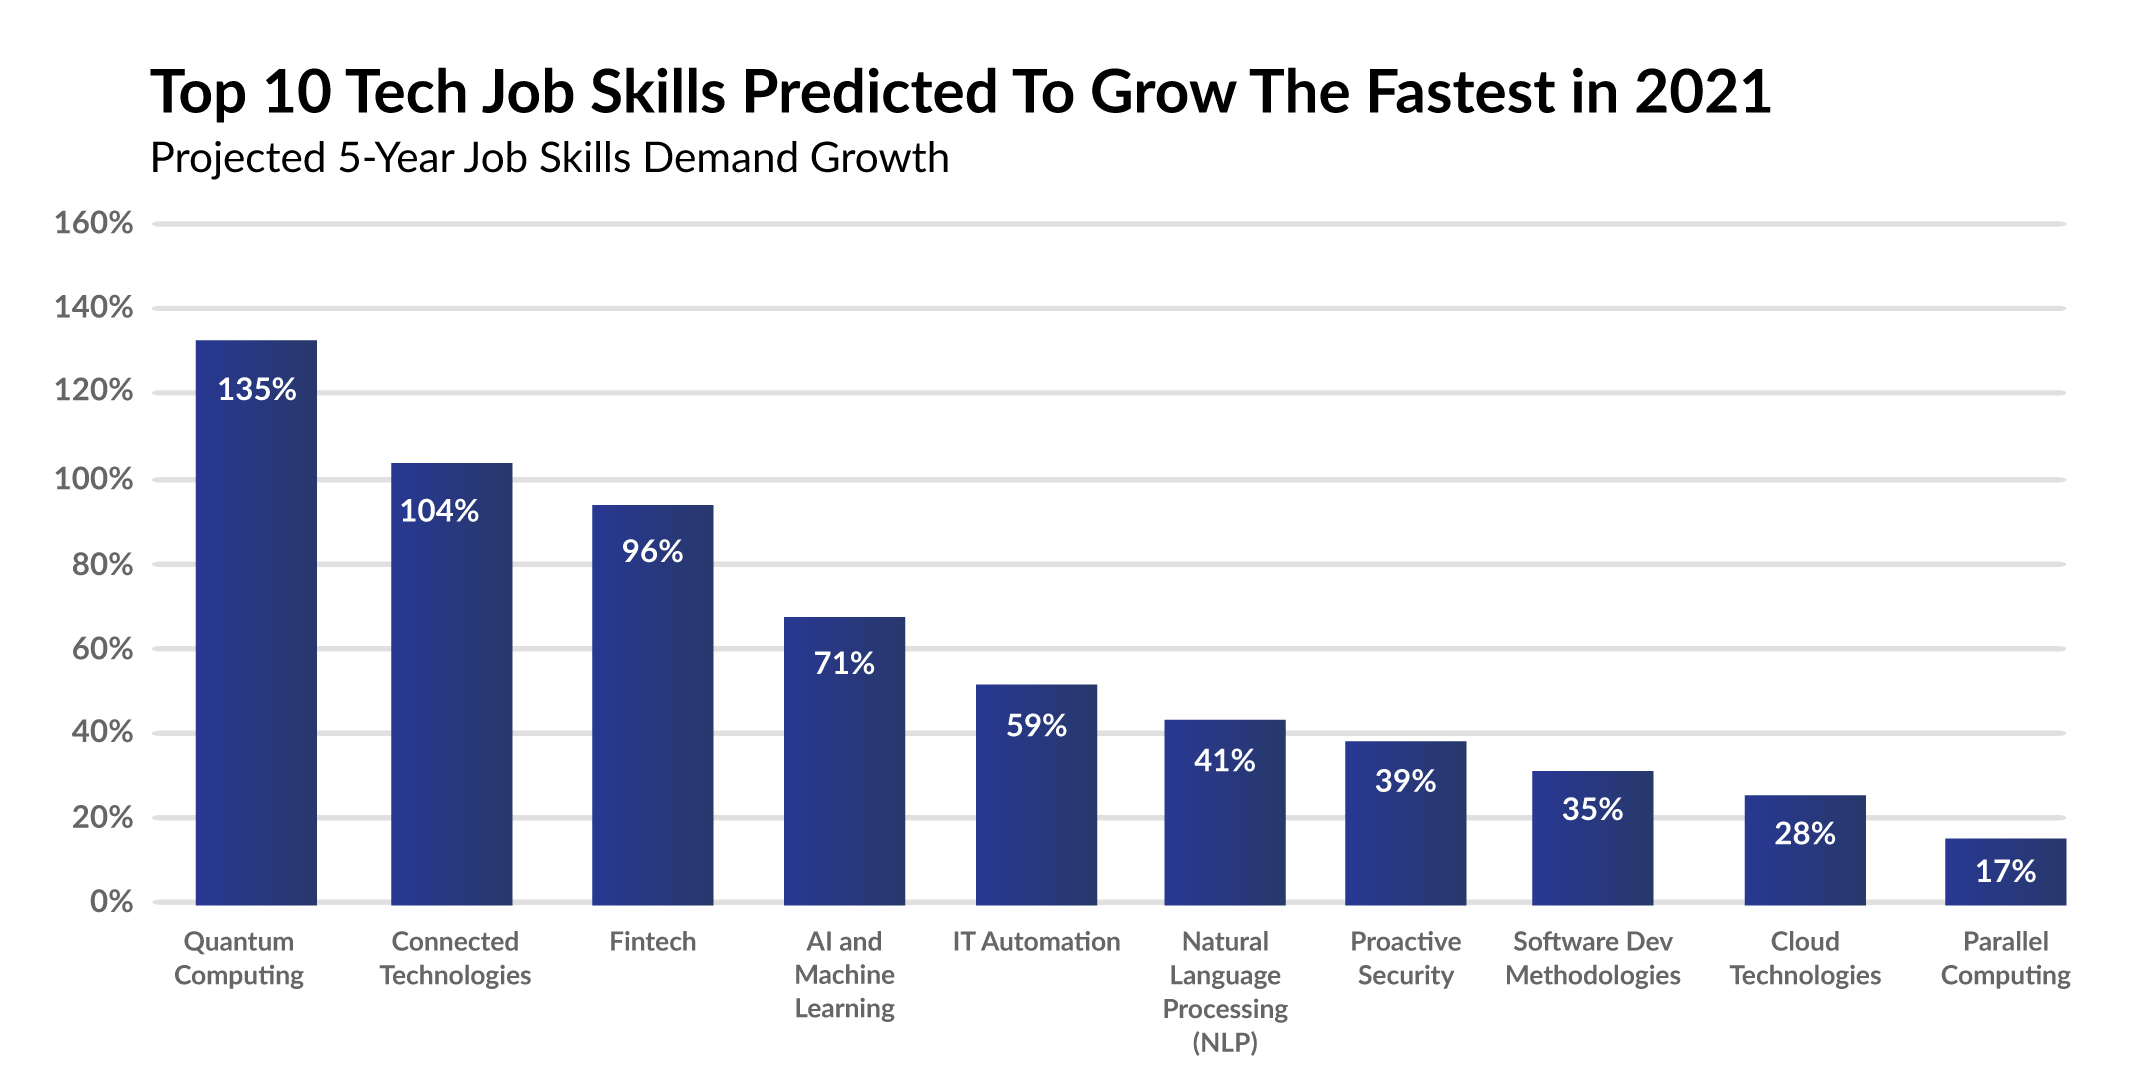 Infographic showing 10 technology skills to see the greatest growth in demand between 2021 and 2025